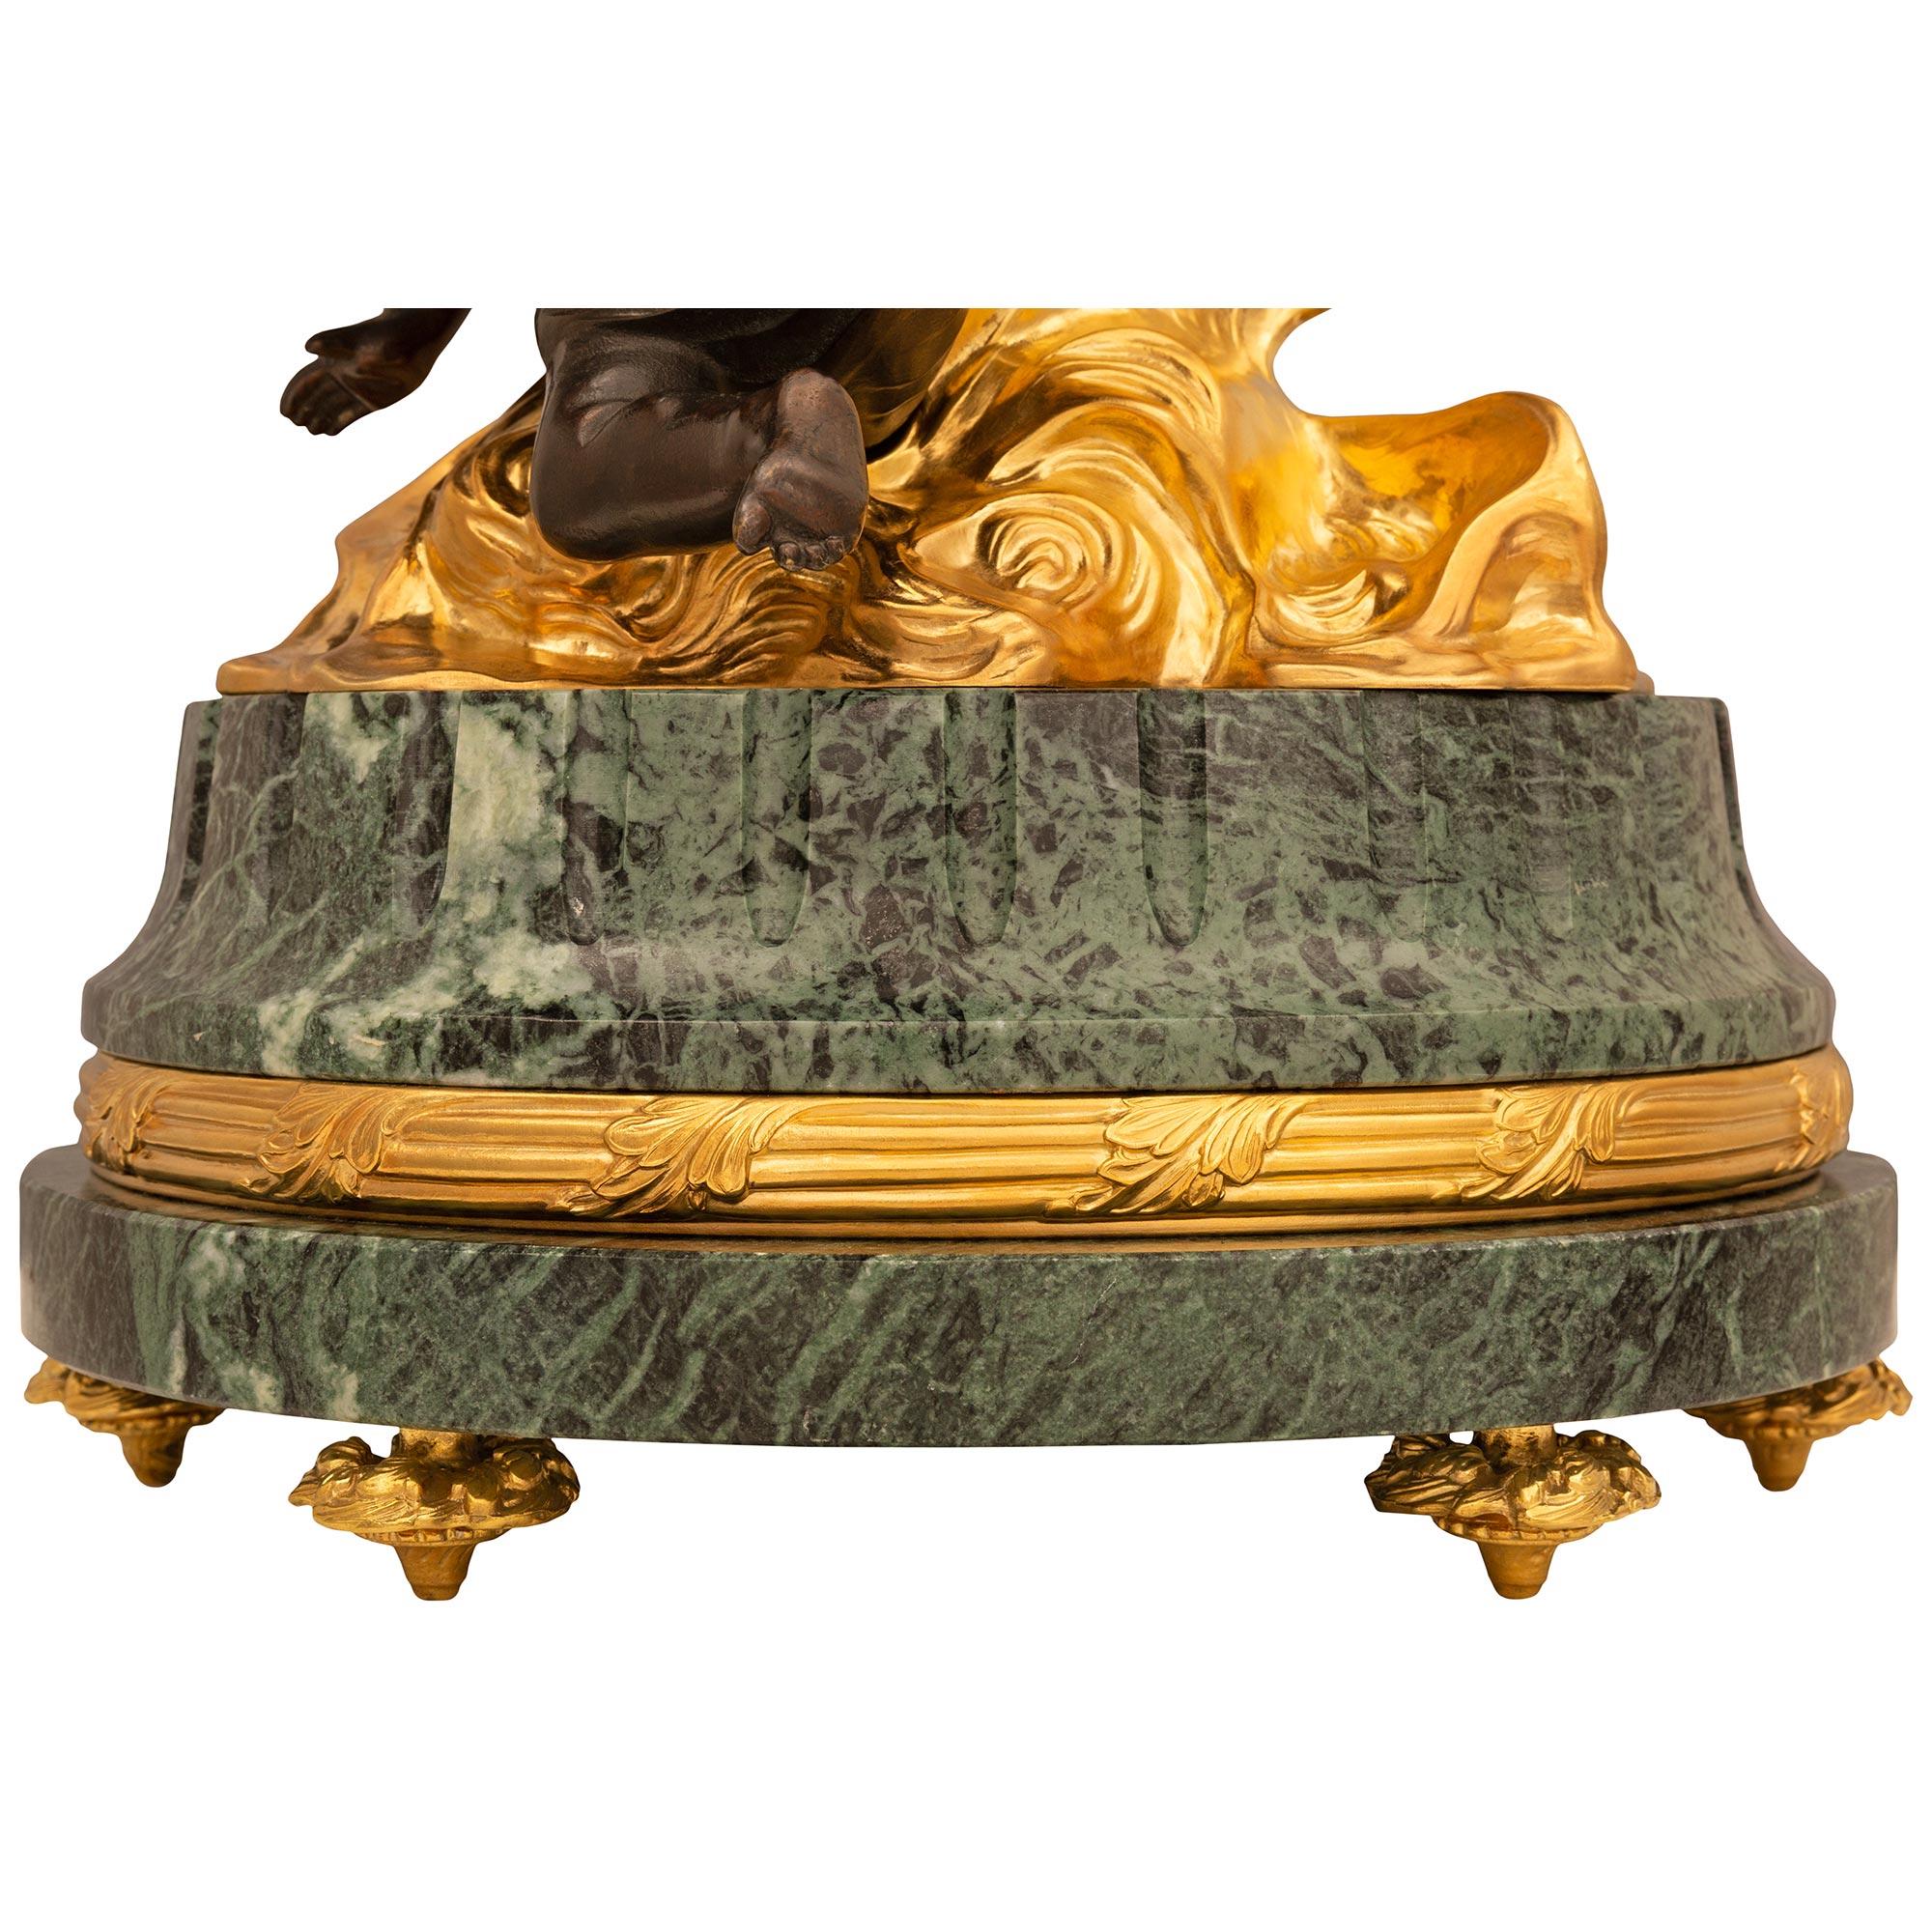 Continental Patinated Bronze and Ormolu Clock, signed Imperial For Sale 3